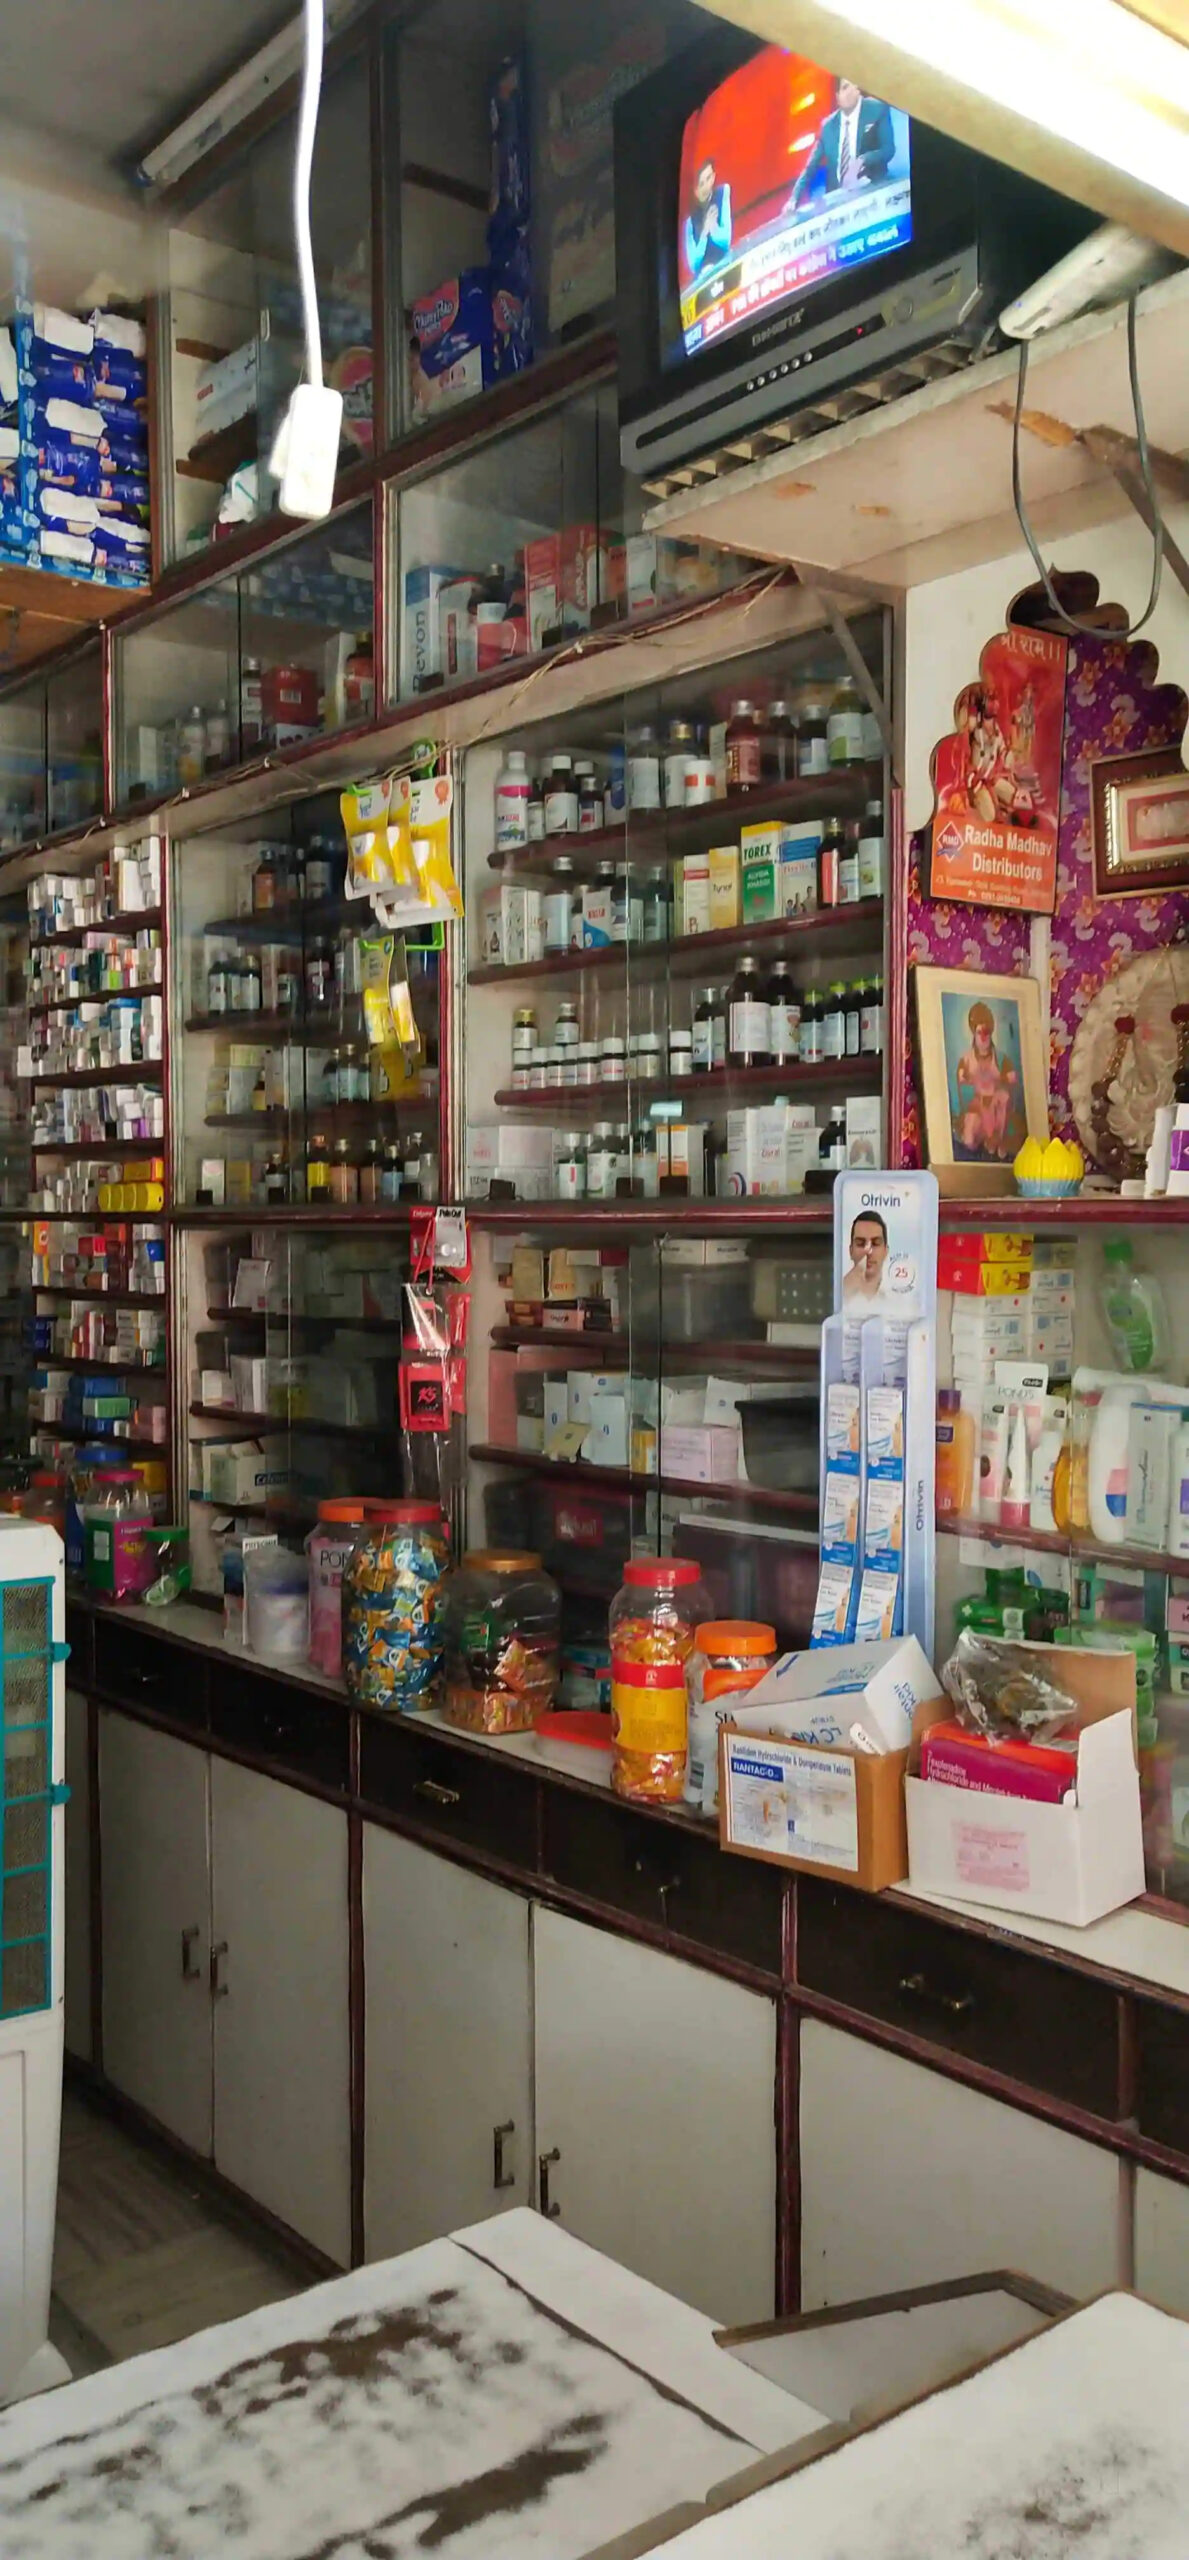 Dilip Medical Store